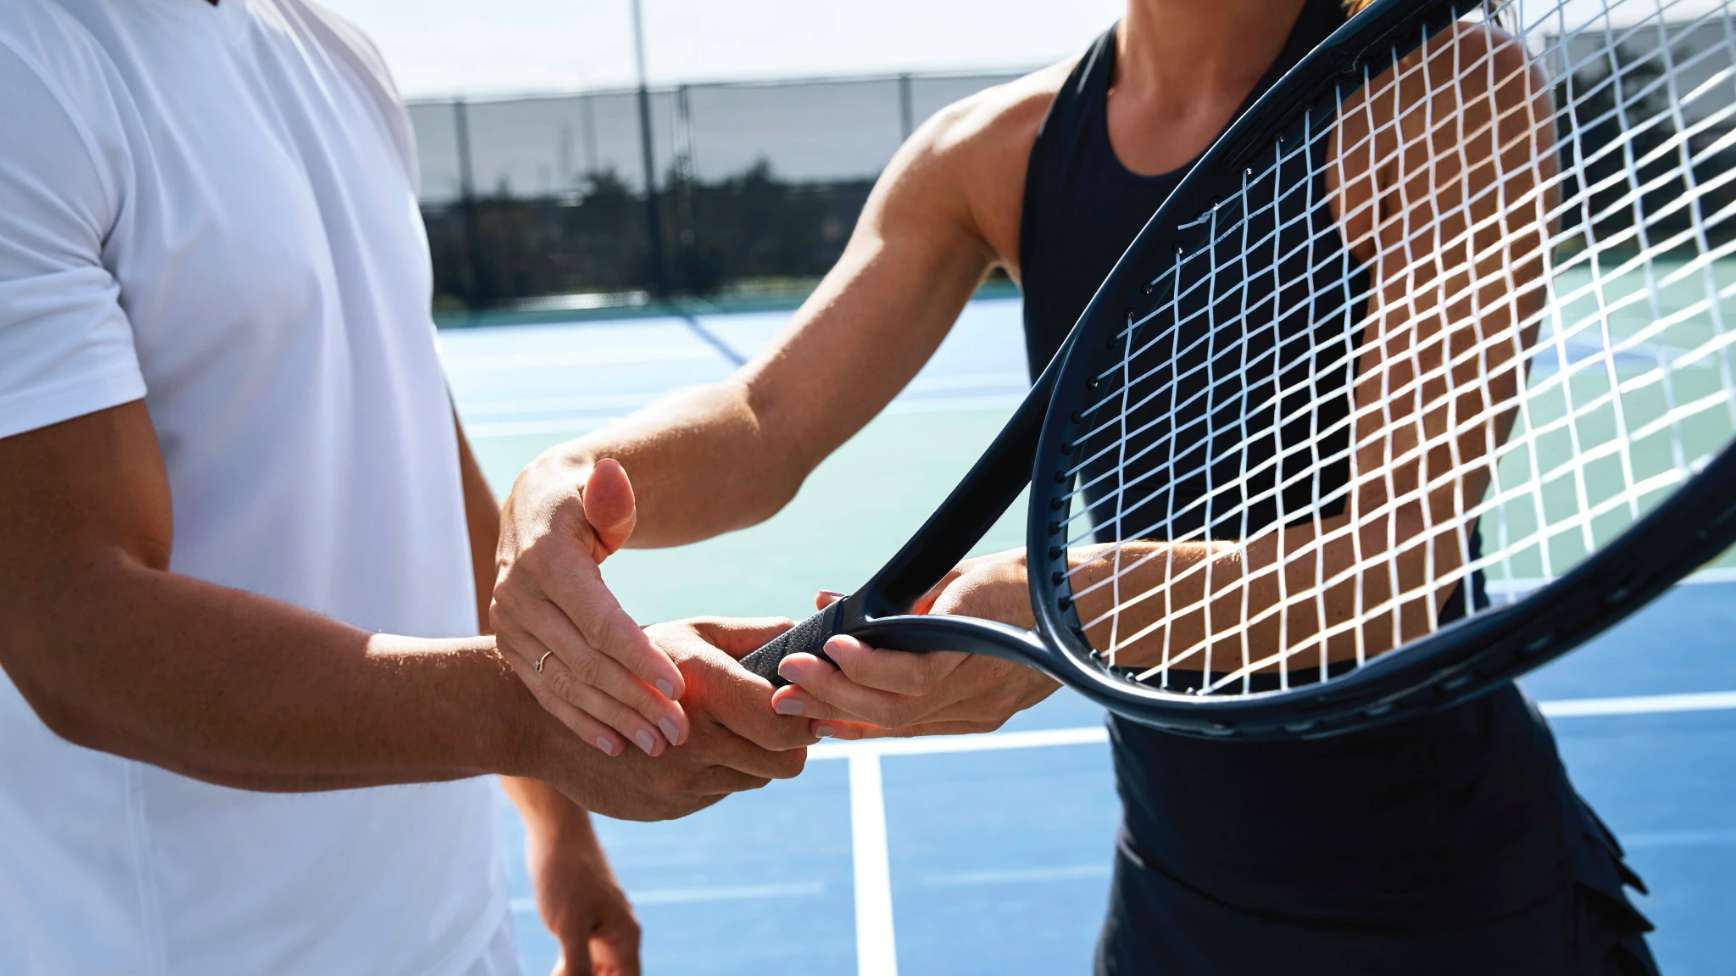 -	Person helping another person to properly hold a tennis racquet on an outdoor tennis court. 